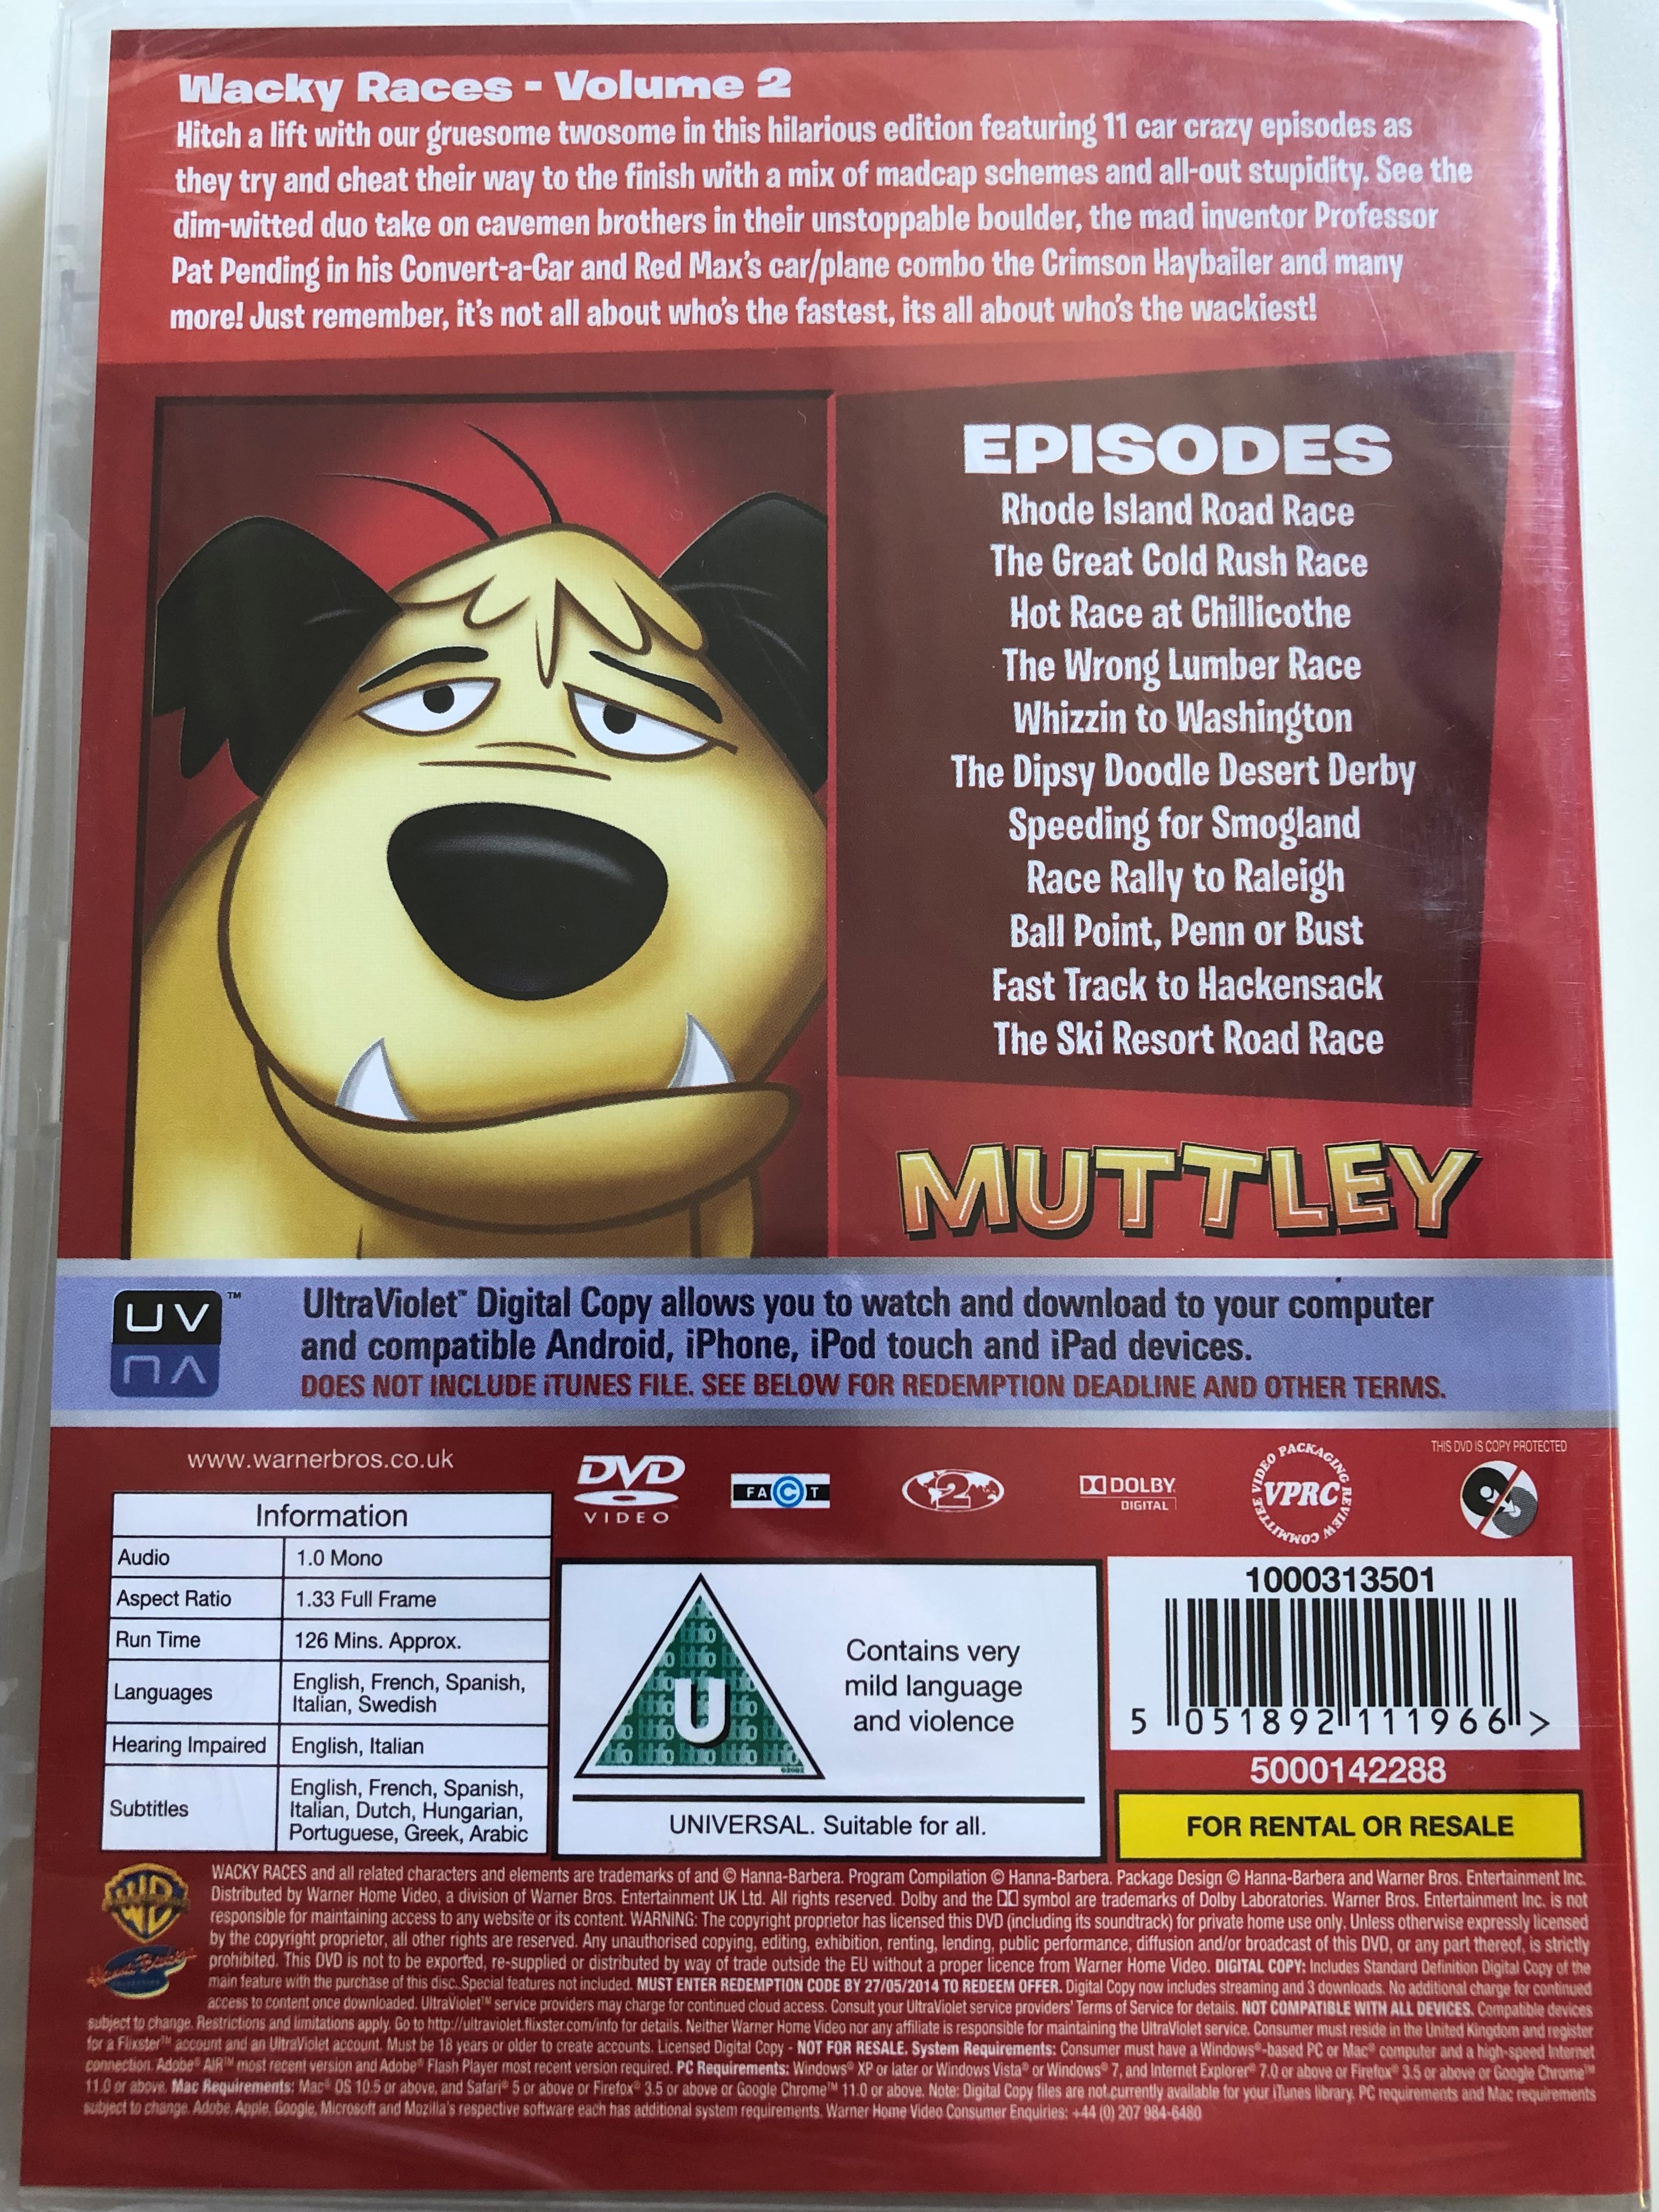 Muttley DVD 1968 Wacky Races - Volume 2 / 12 episodes on disc / Directed by  William Hanna, Joseph Barbera / Voices: Paul Winchell, Don Messick, Janet  Waldo, Daws Butler - bibleinmylanguage